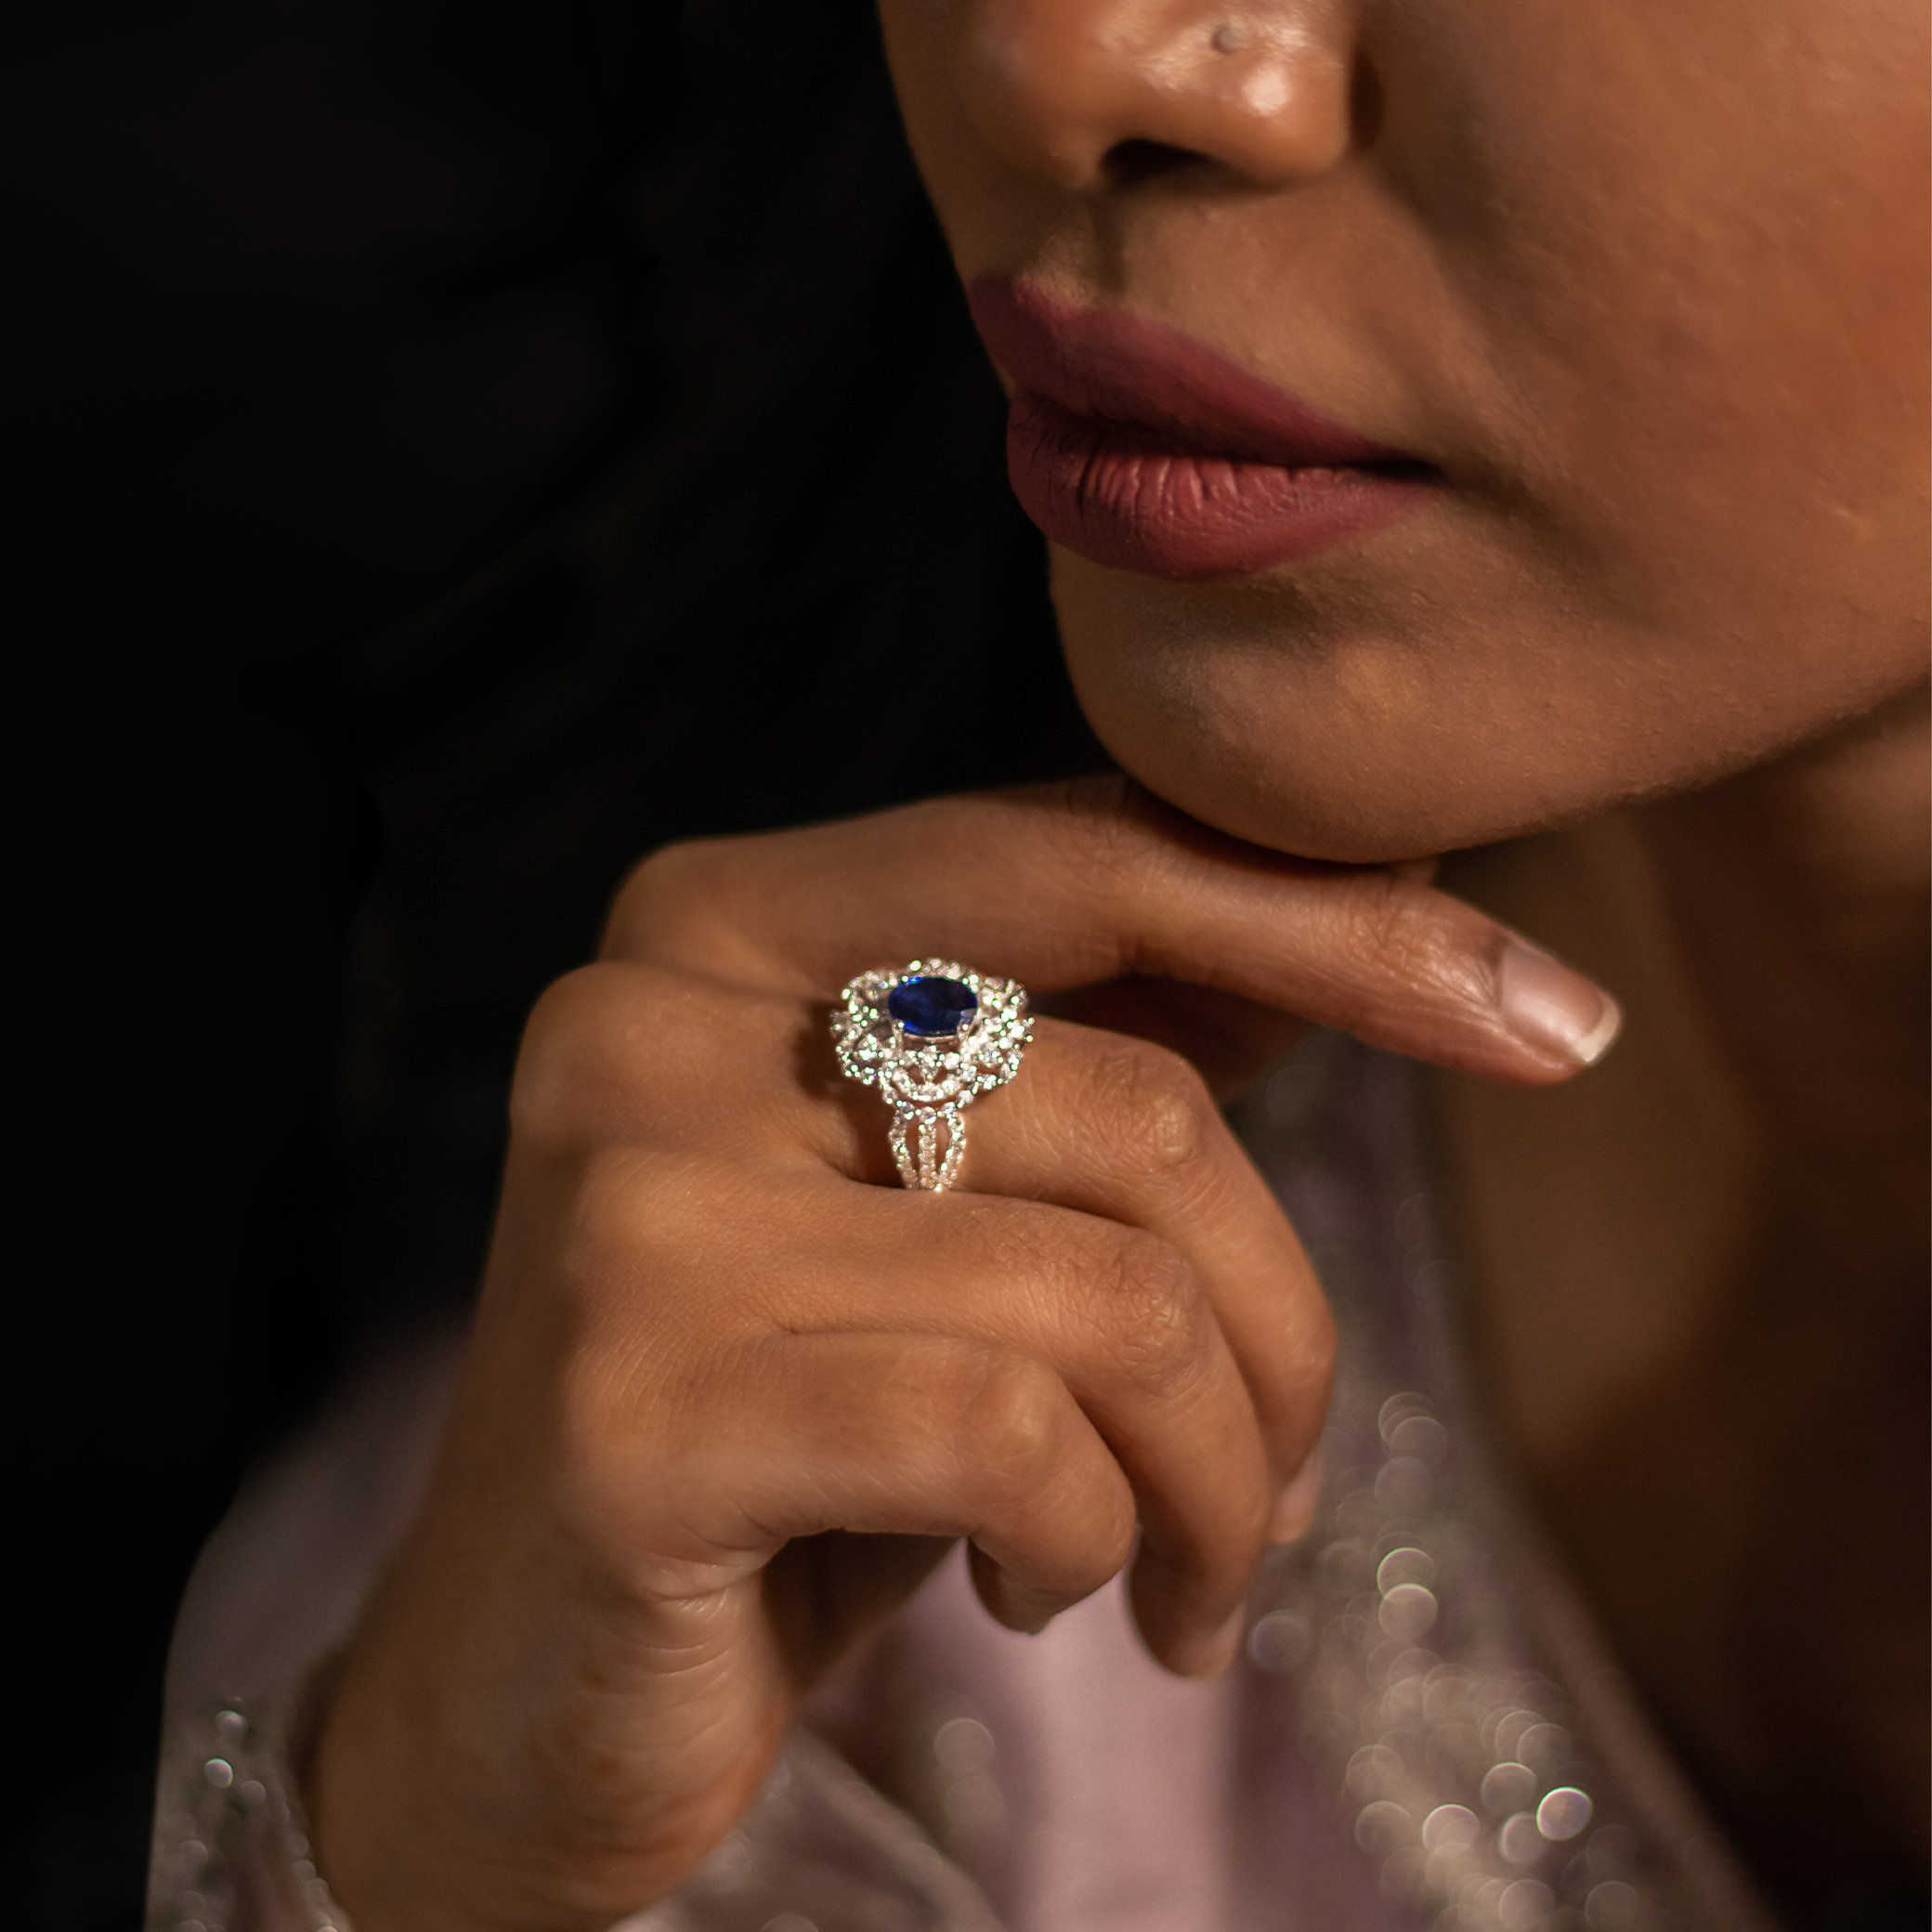 White Gold, 2.35ct Sapphire And Diamond Ring Available For Immediate Sale  At Sotheby's